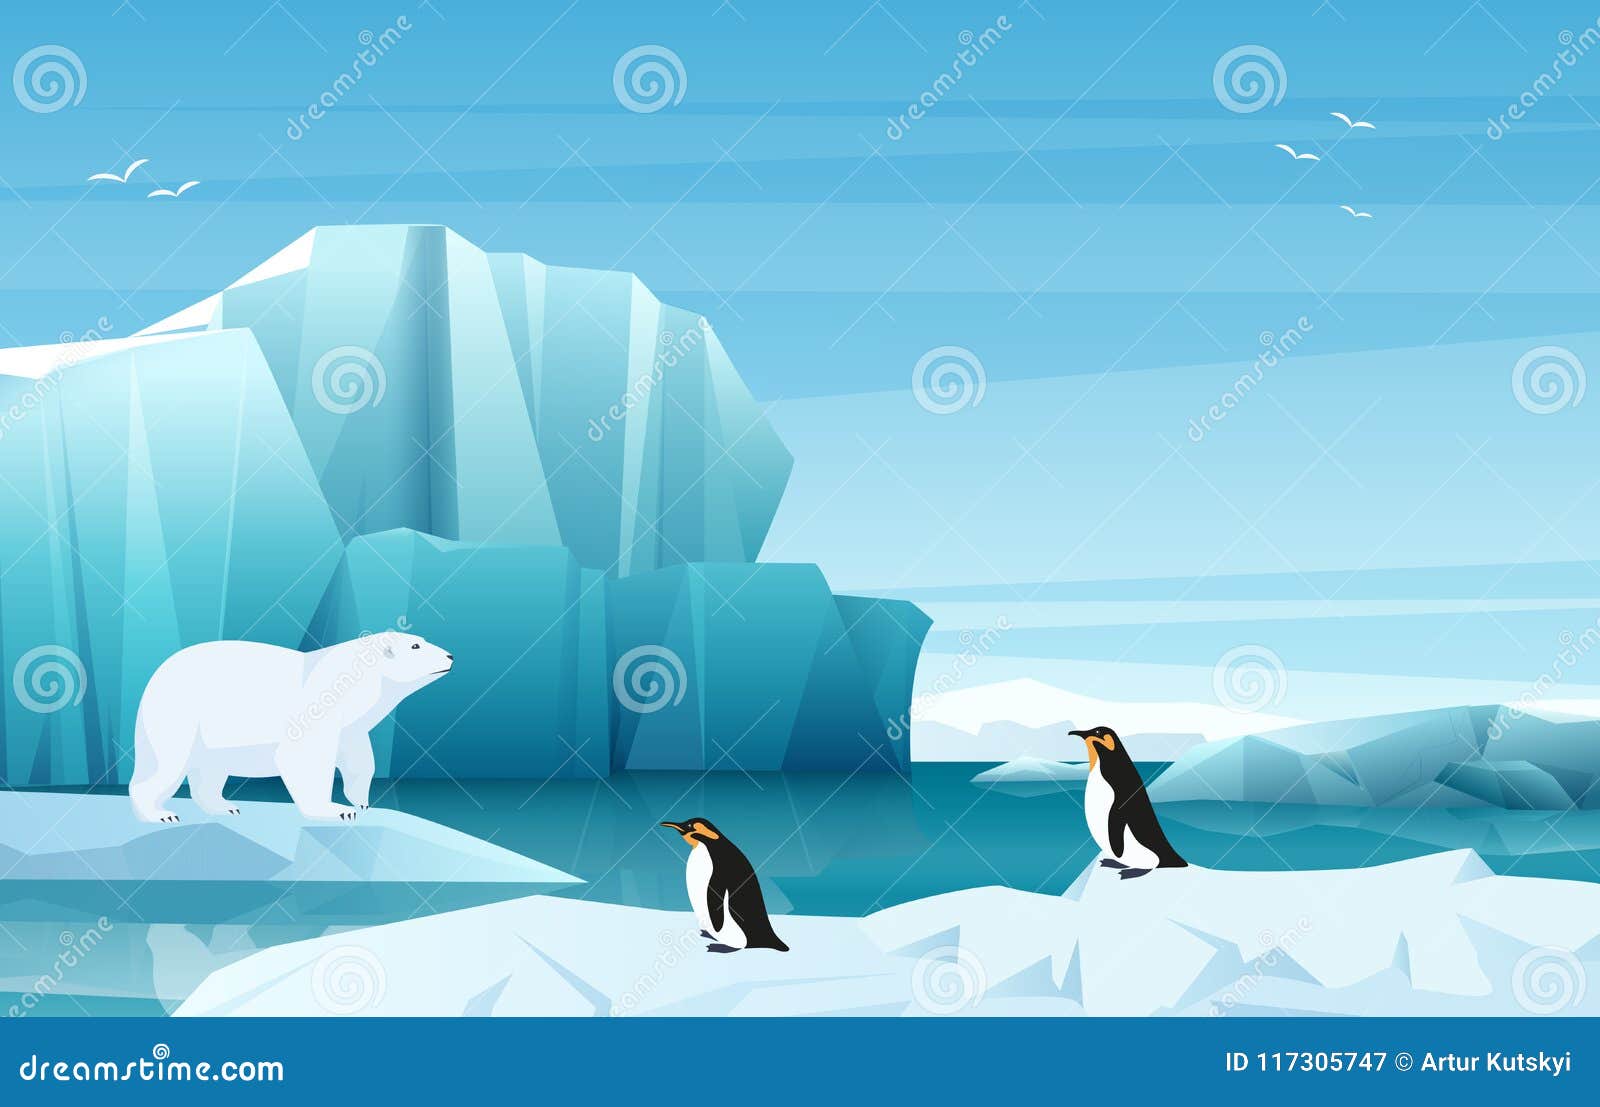 cartoon nature winter arctic landscape with ice mountains. white bear and penguins.  game style .